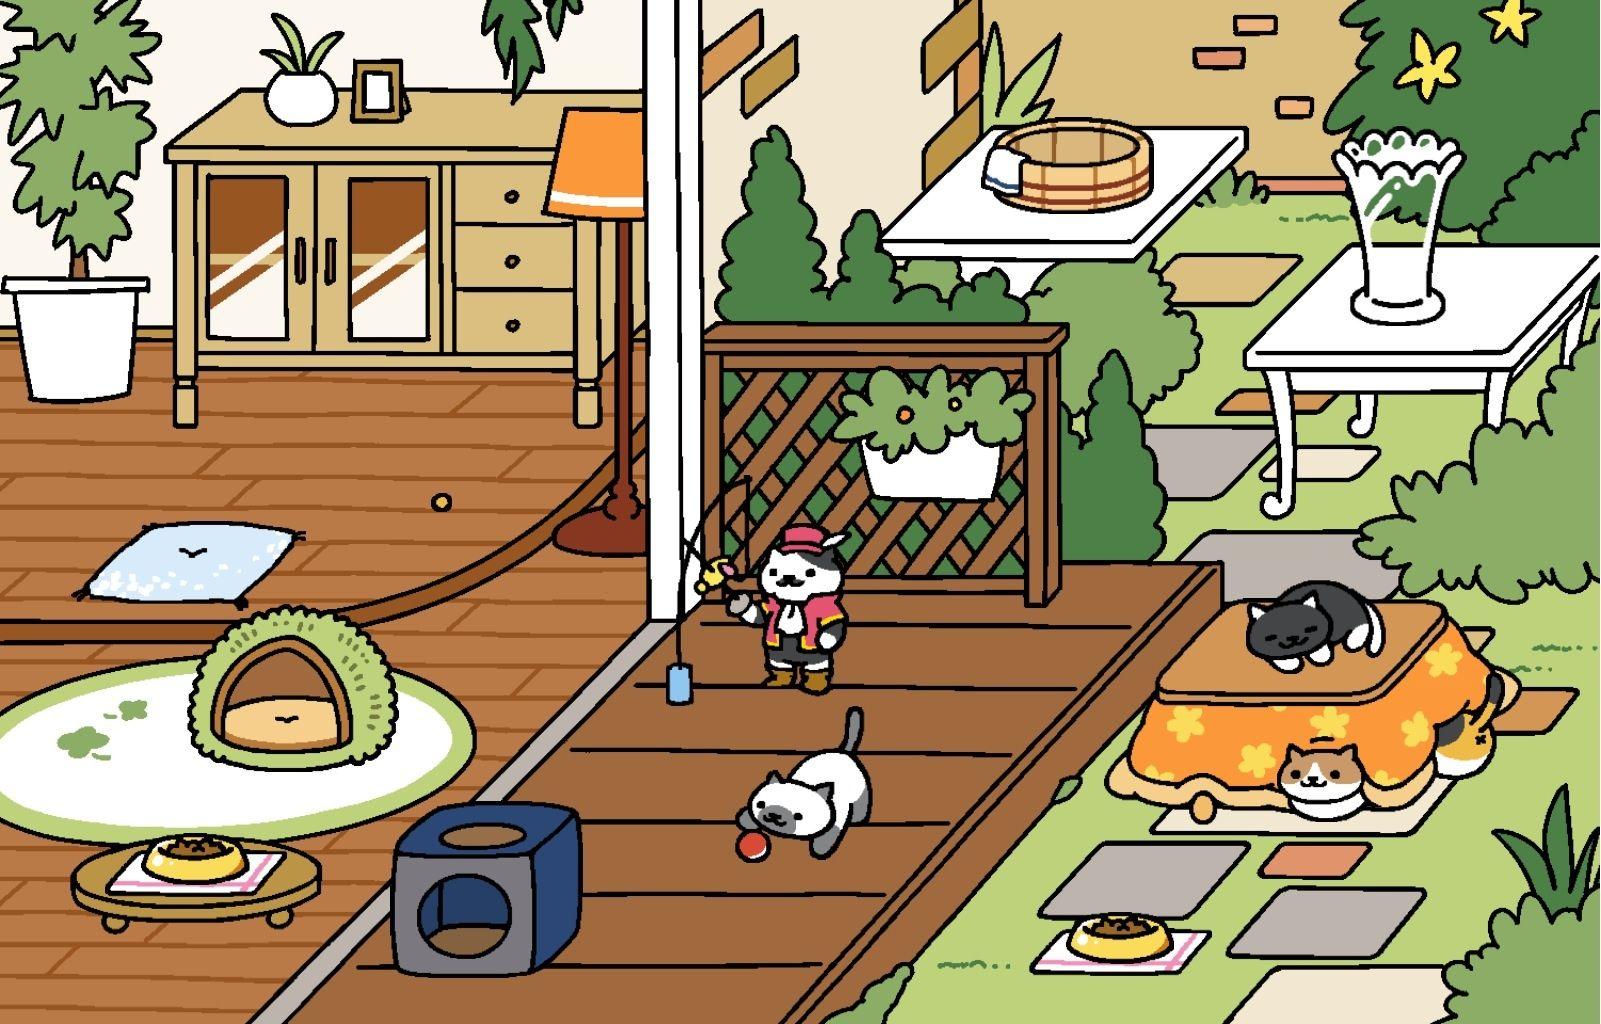 Tap to see more Neko Atsume the cat wallpapers backgrounds